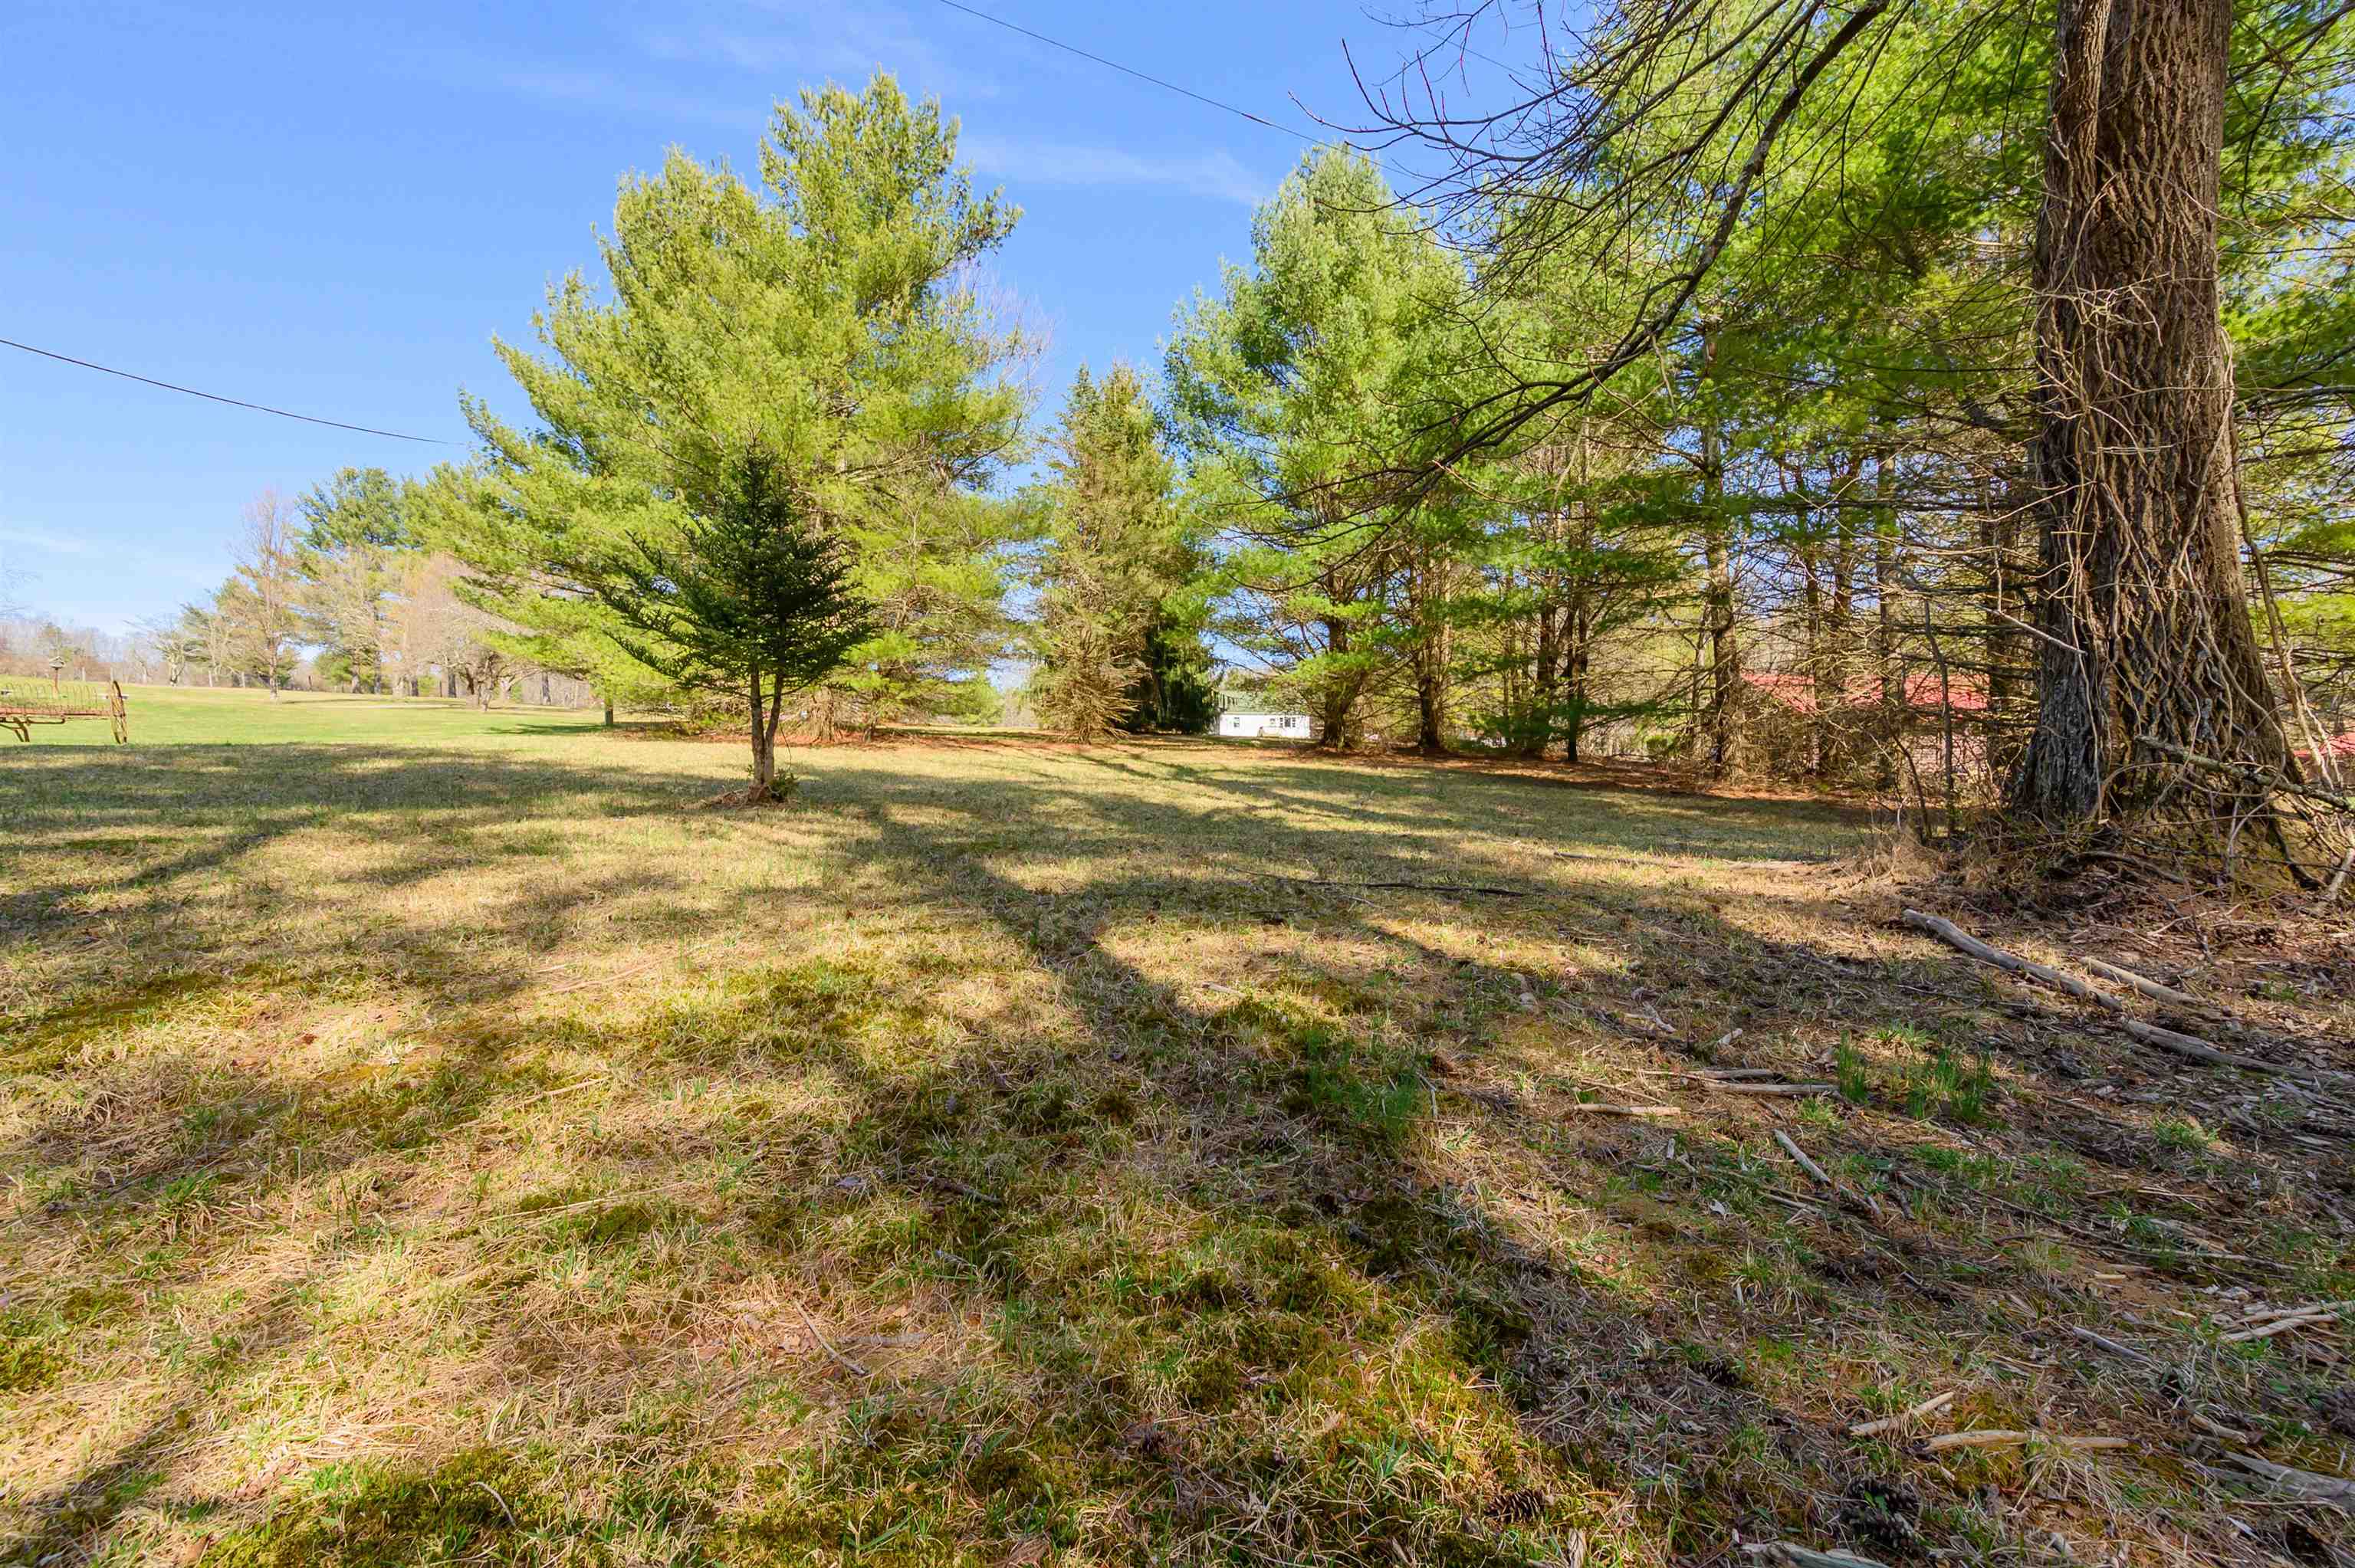 Build your dream home tucked away on over 3.5 acres in this partially clear, mostly wooded property. A peaceful creek runs through the property with beautiful mountain laurel filling the hillside. Enjoy the convivence to the town of Floyd and down the mountain to Roanoke. Call today to schedule a showing!